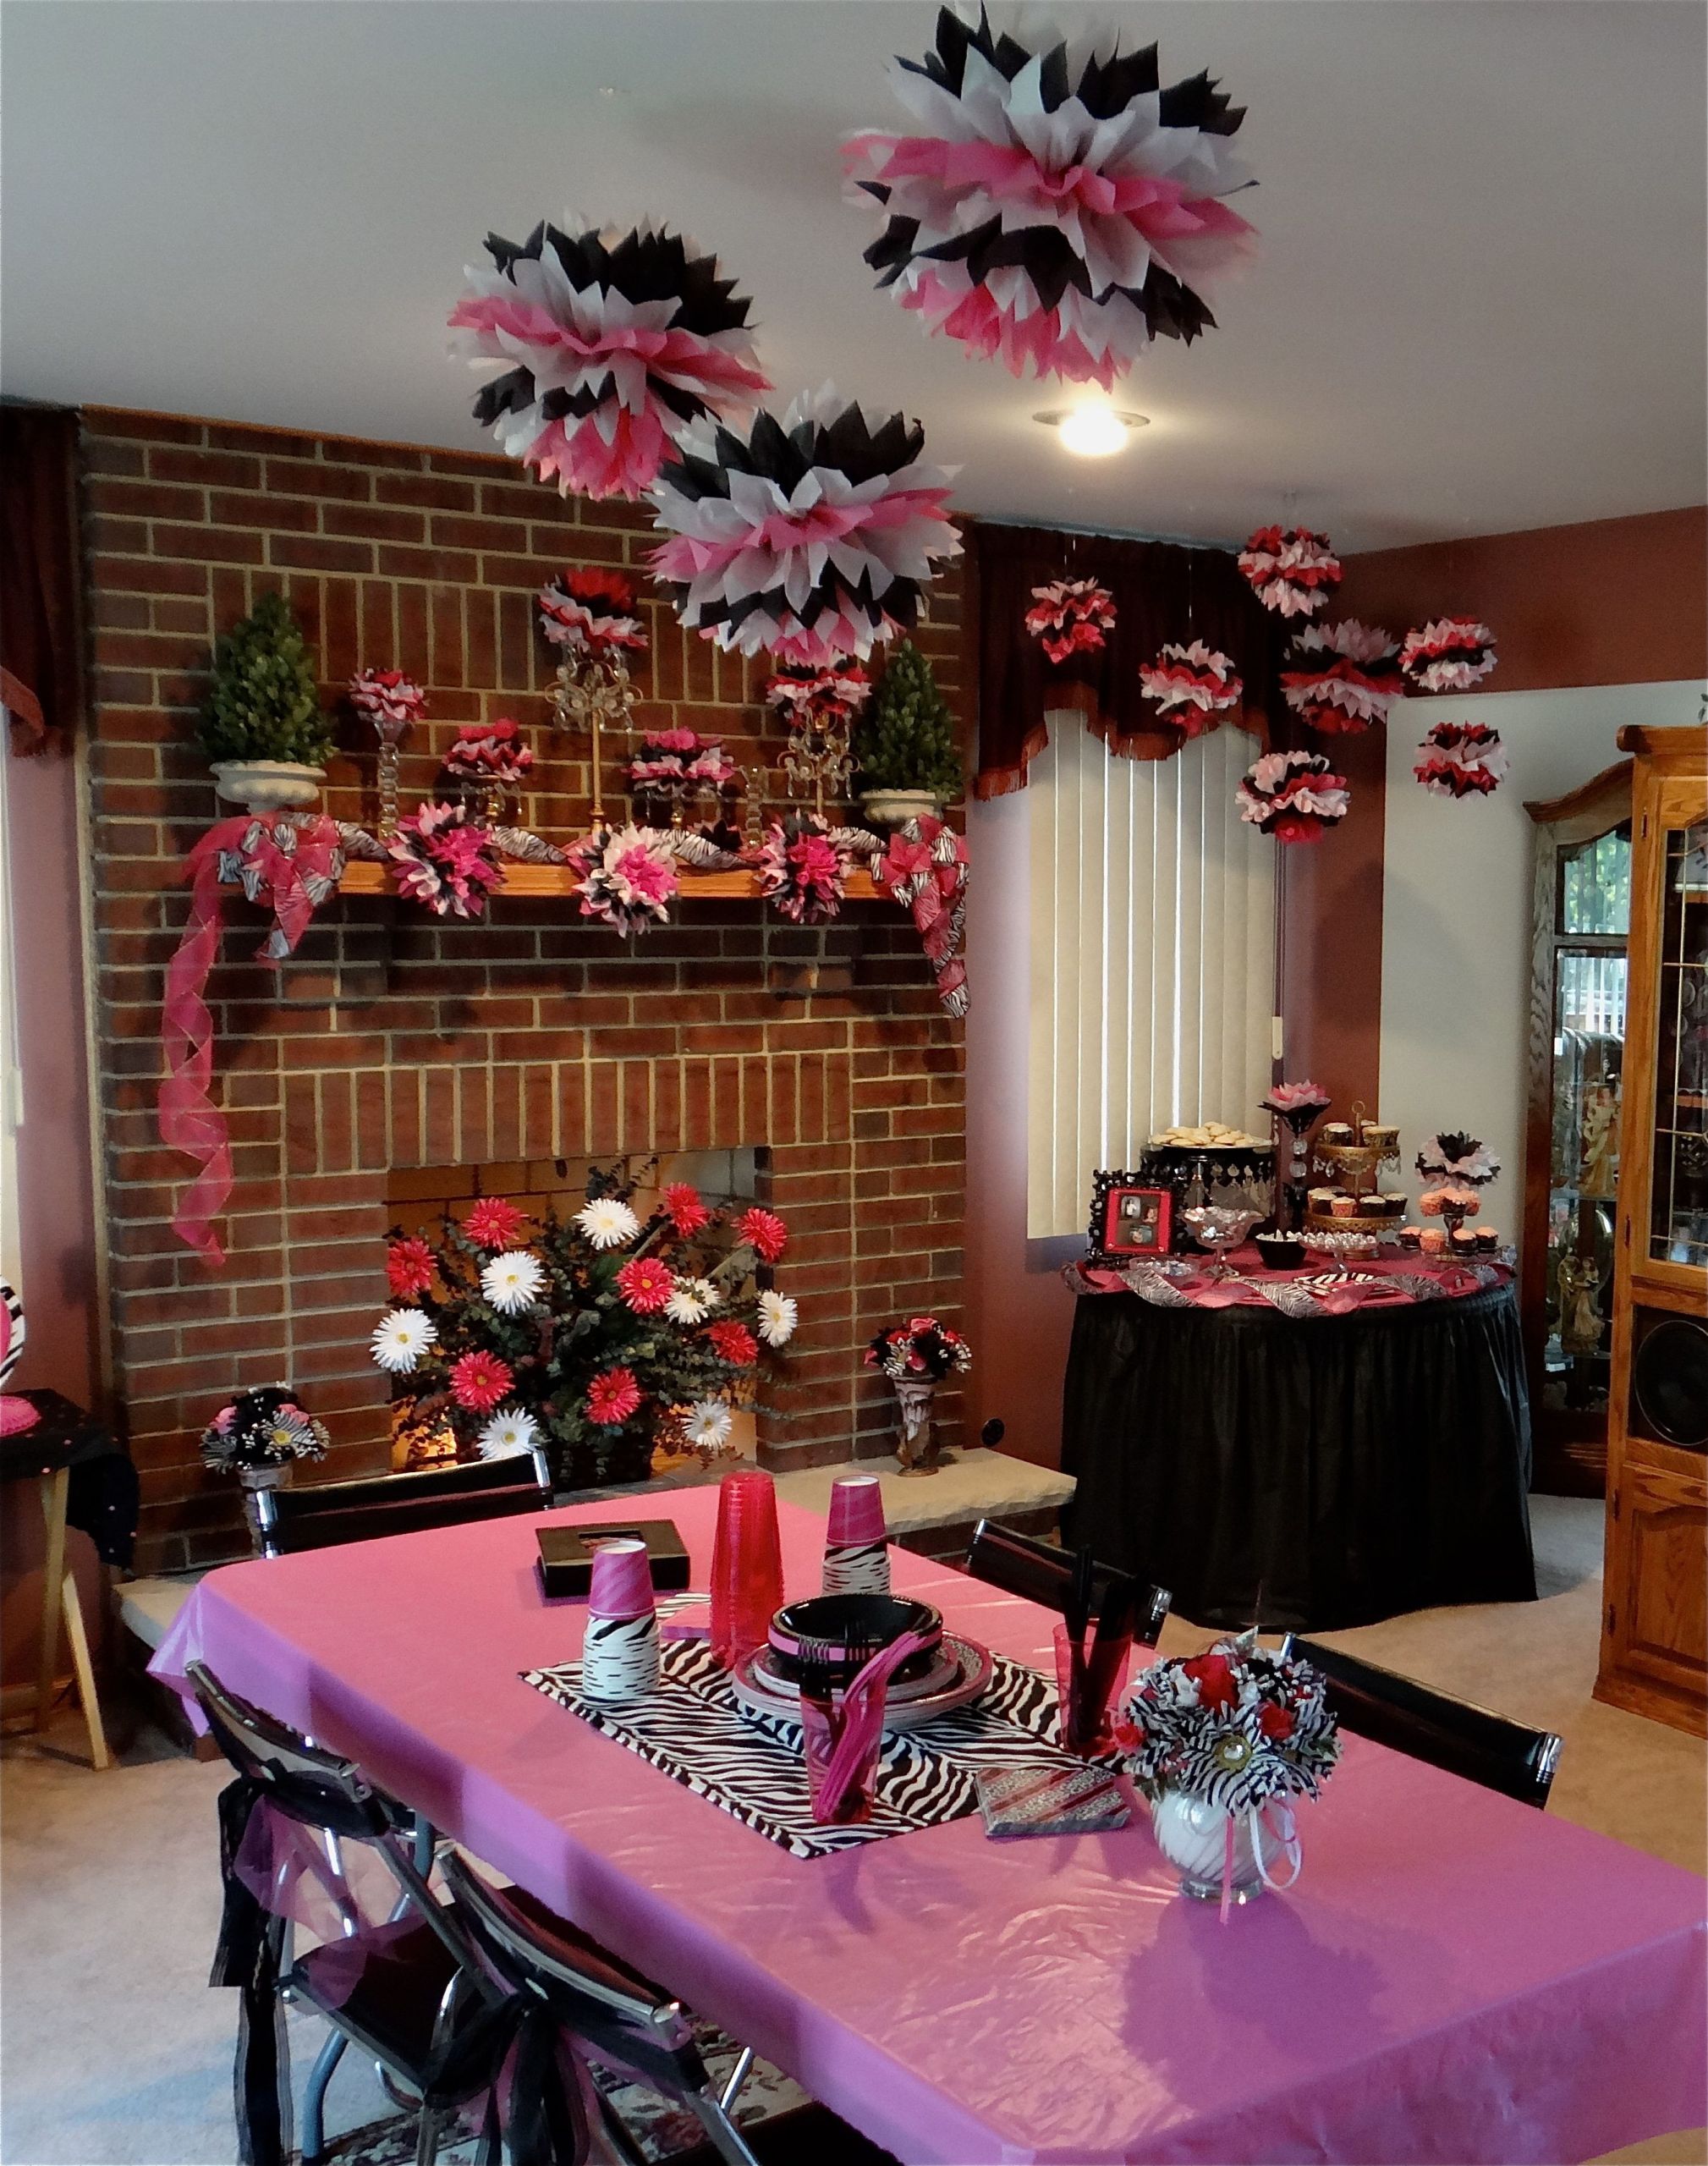 Backyard Graduation Party Ideas Pink And Black Gold
 I decorated with pink black & zebra for my daughters